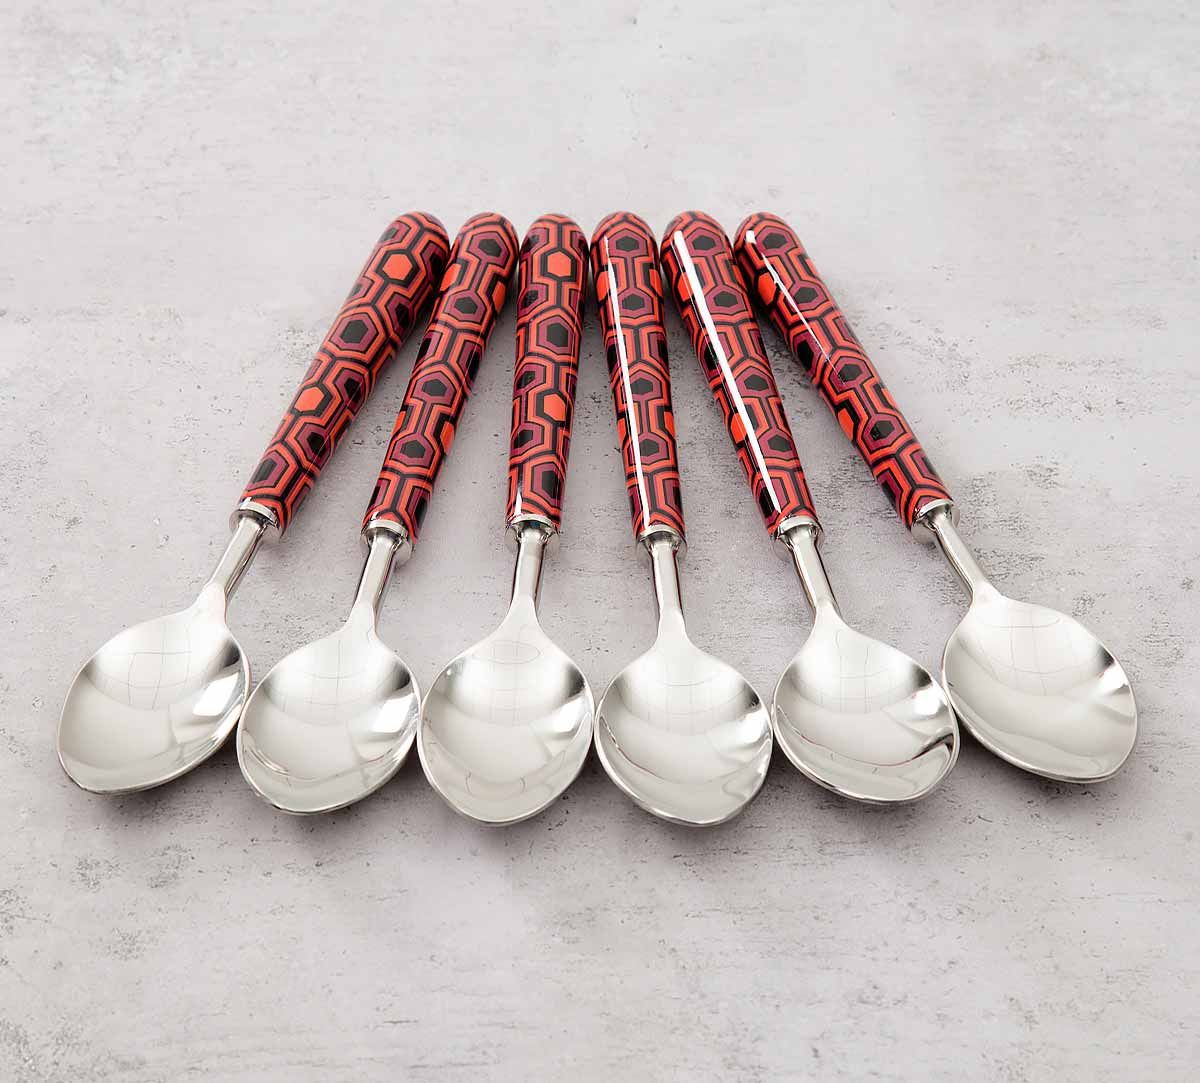 India Circus Prismatic Hexagons Table Spoon Set of 6